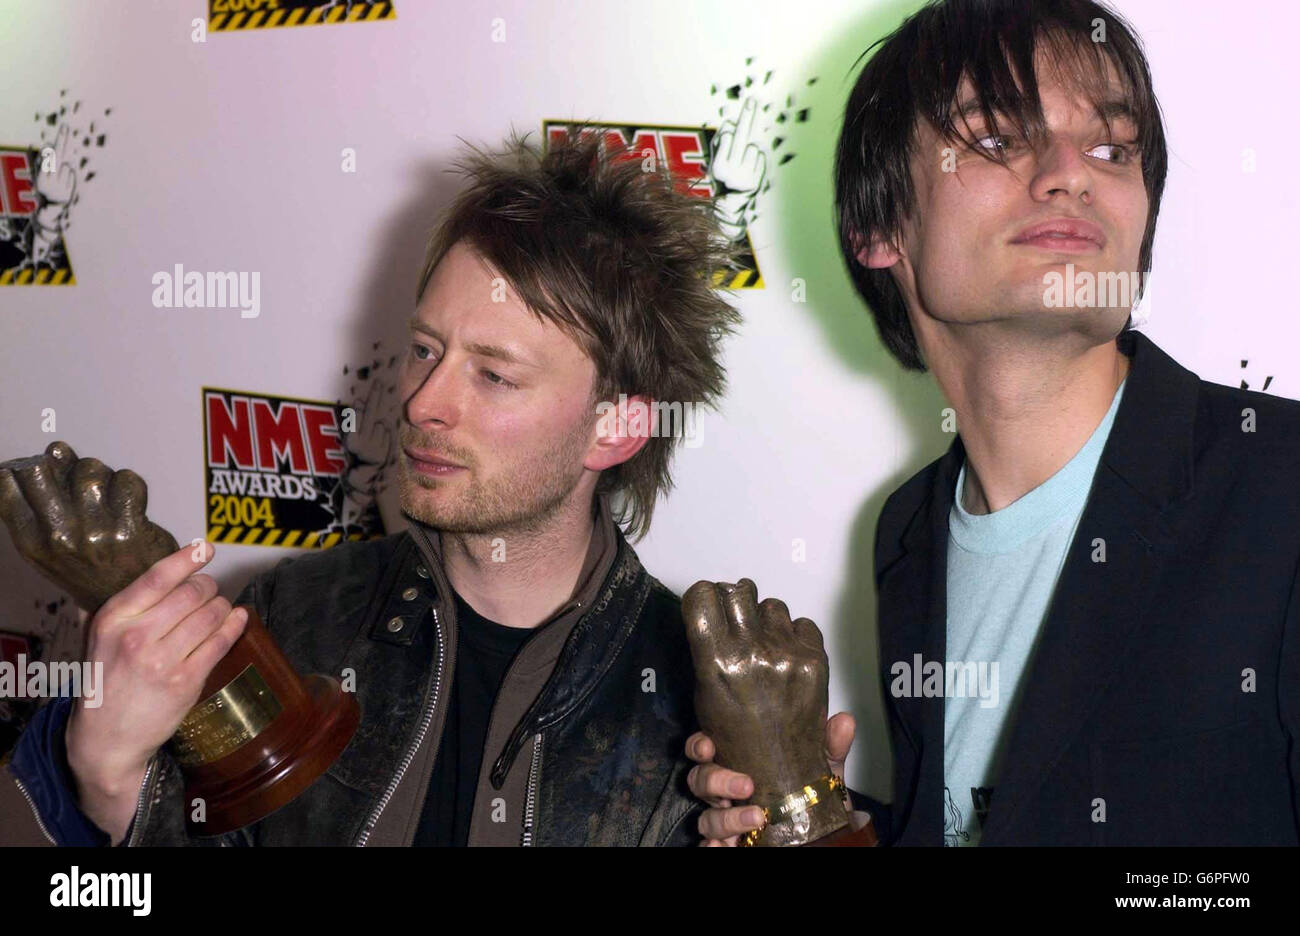 Radiohead with their awards for Best Video and Best Album during the NME  Awards at Hammersmith Palais in west London. The annual music awards are  decided by a readers' poll in NME